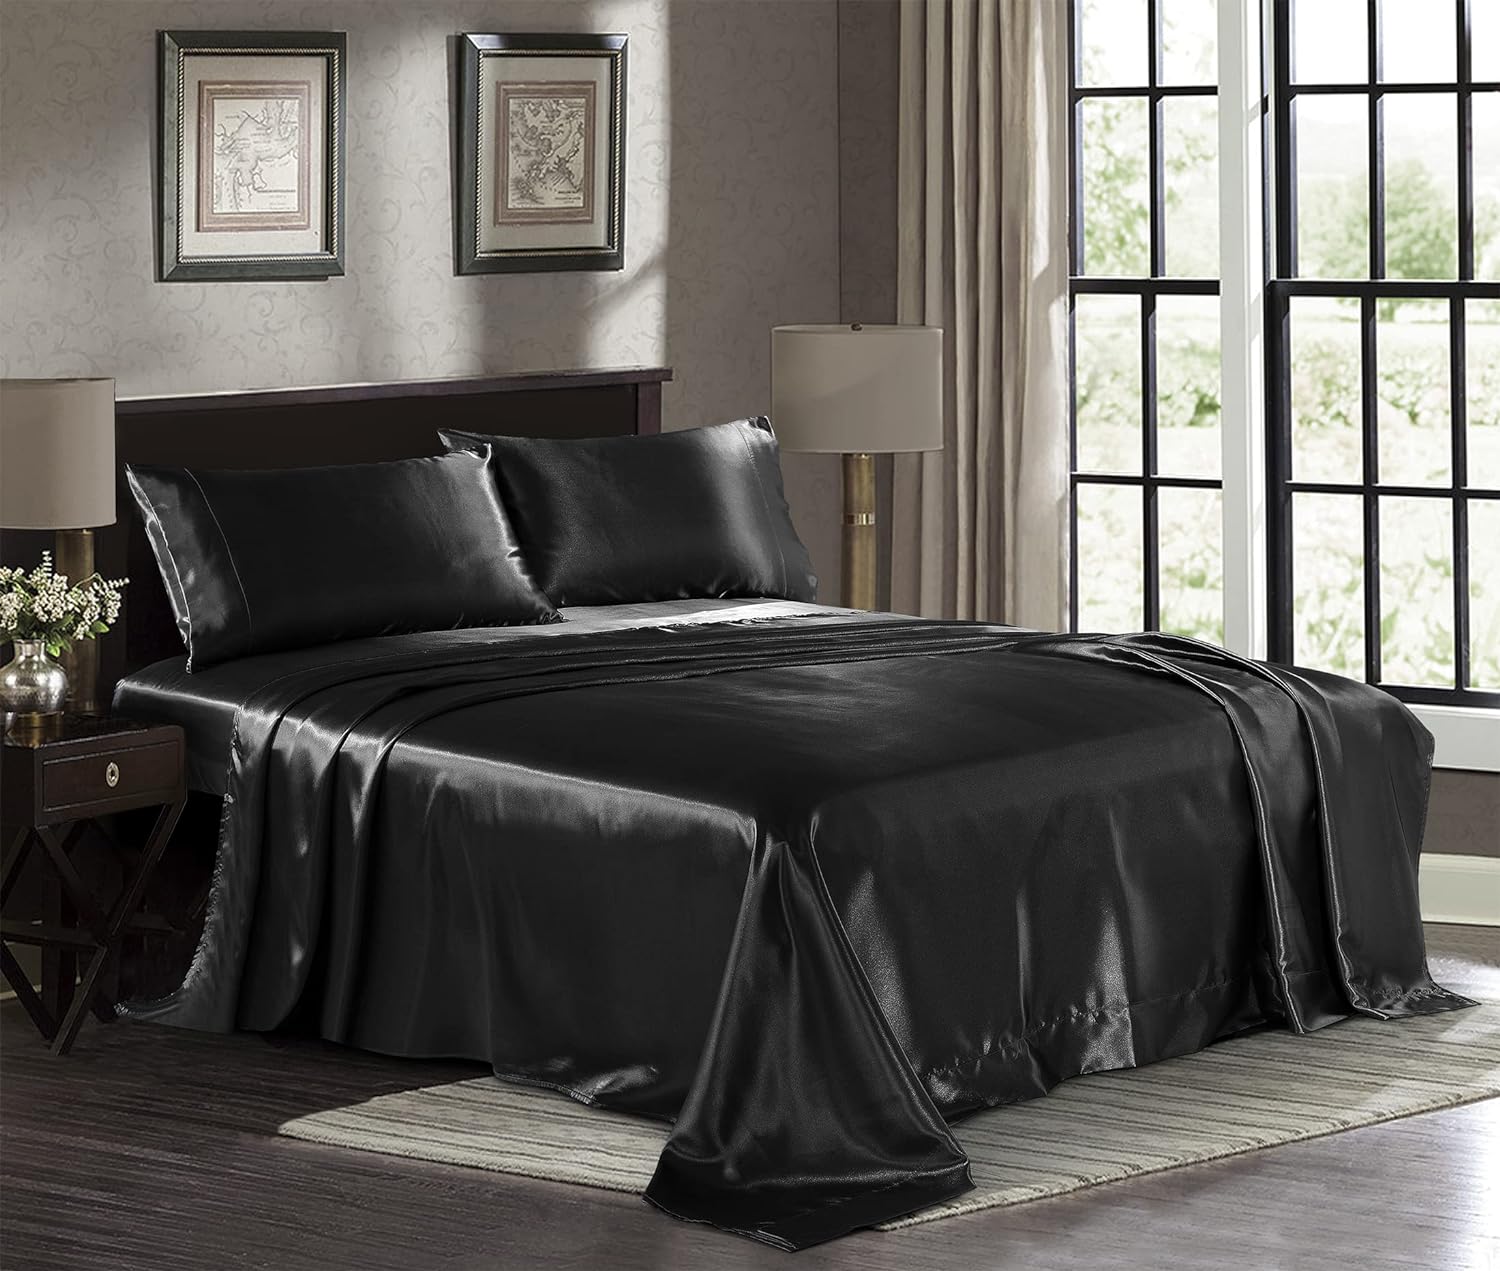 Black, 90x200cm/35.4x78.7in 4 Sizes IRRIS Bed Sheets Soft Queen Size Solid Color Deep Pocket Bedding Cover Wrinkle Fade Stain Resistant Hotel Fitted Flat Bed Sheet